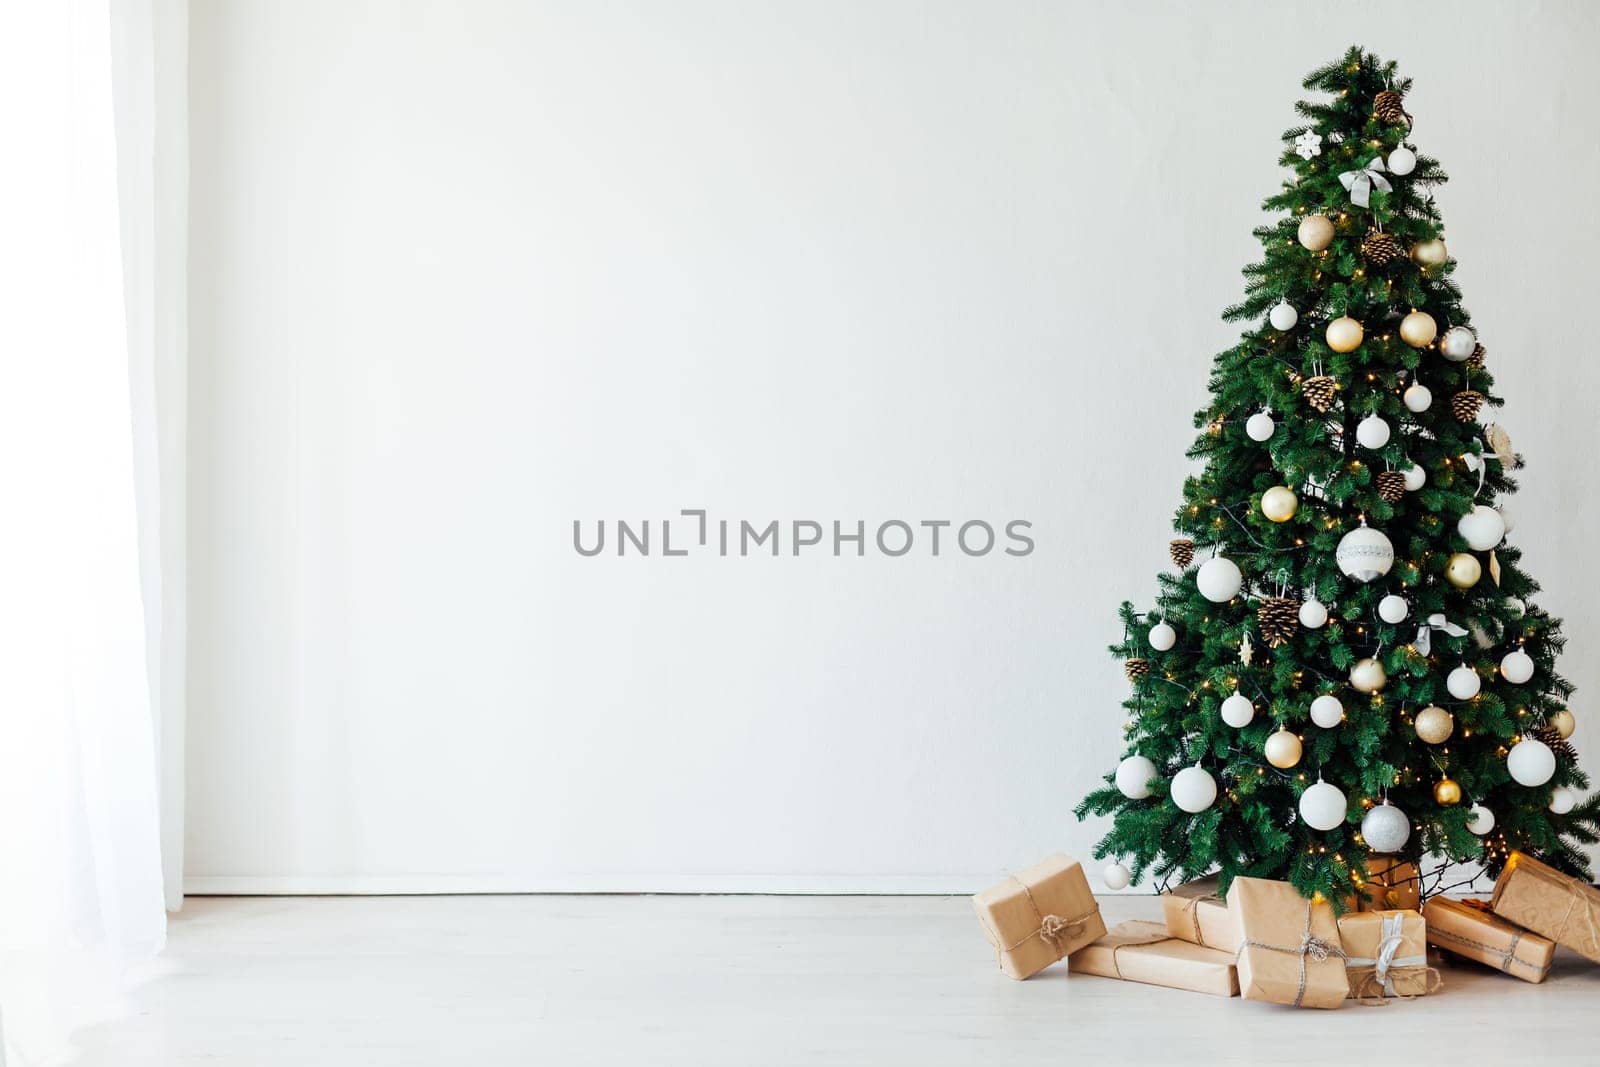 decor of the house with Christmas tree with gifts of the new year holiday winter by Simakov